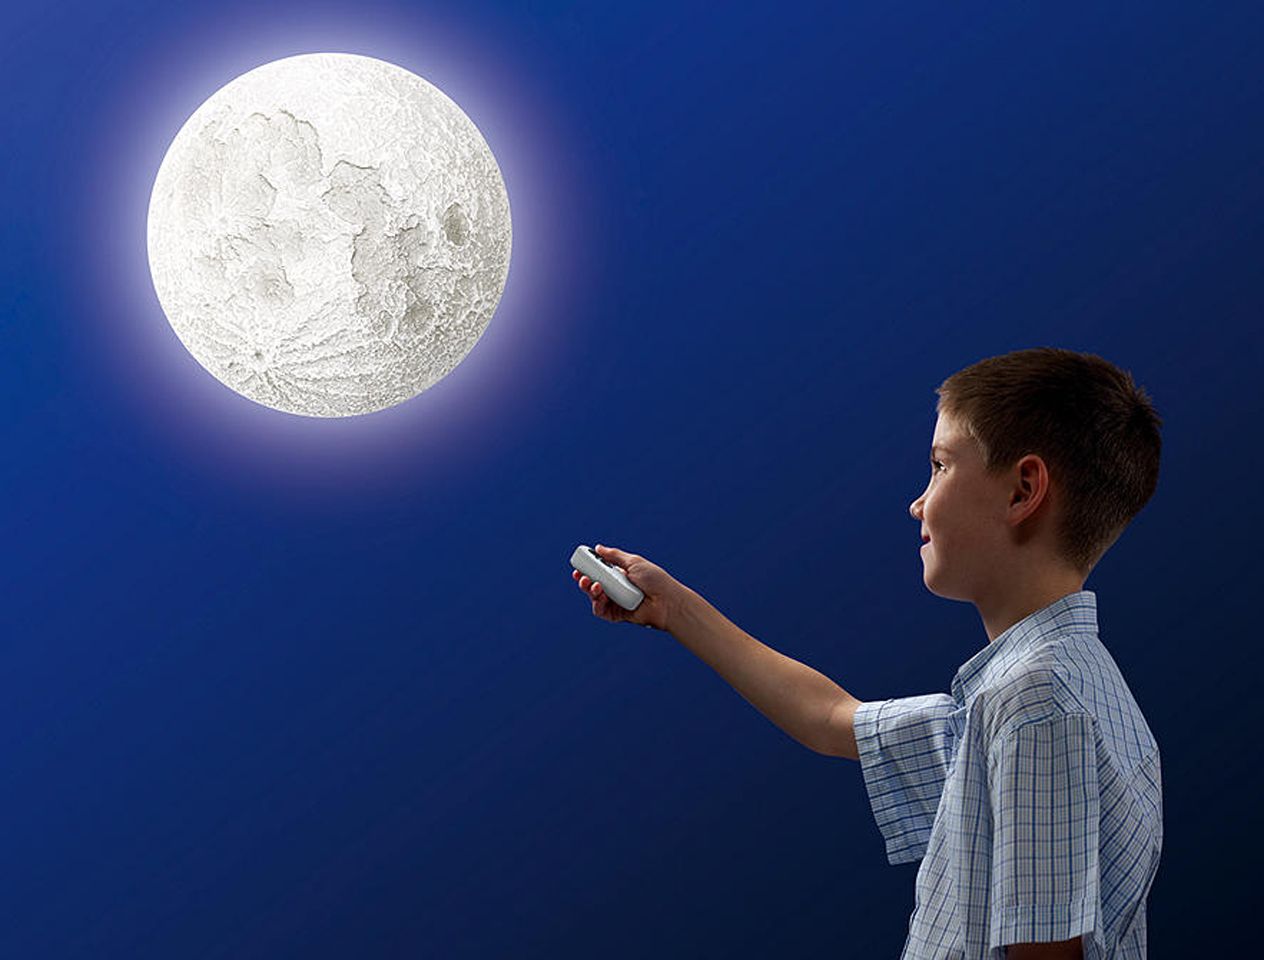 To the moon and back: style and gifts for little stargazers